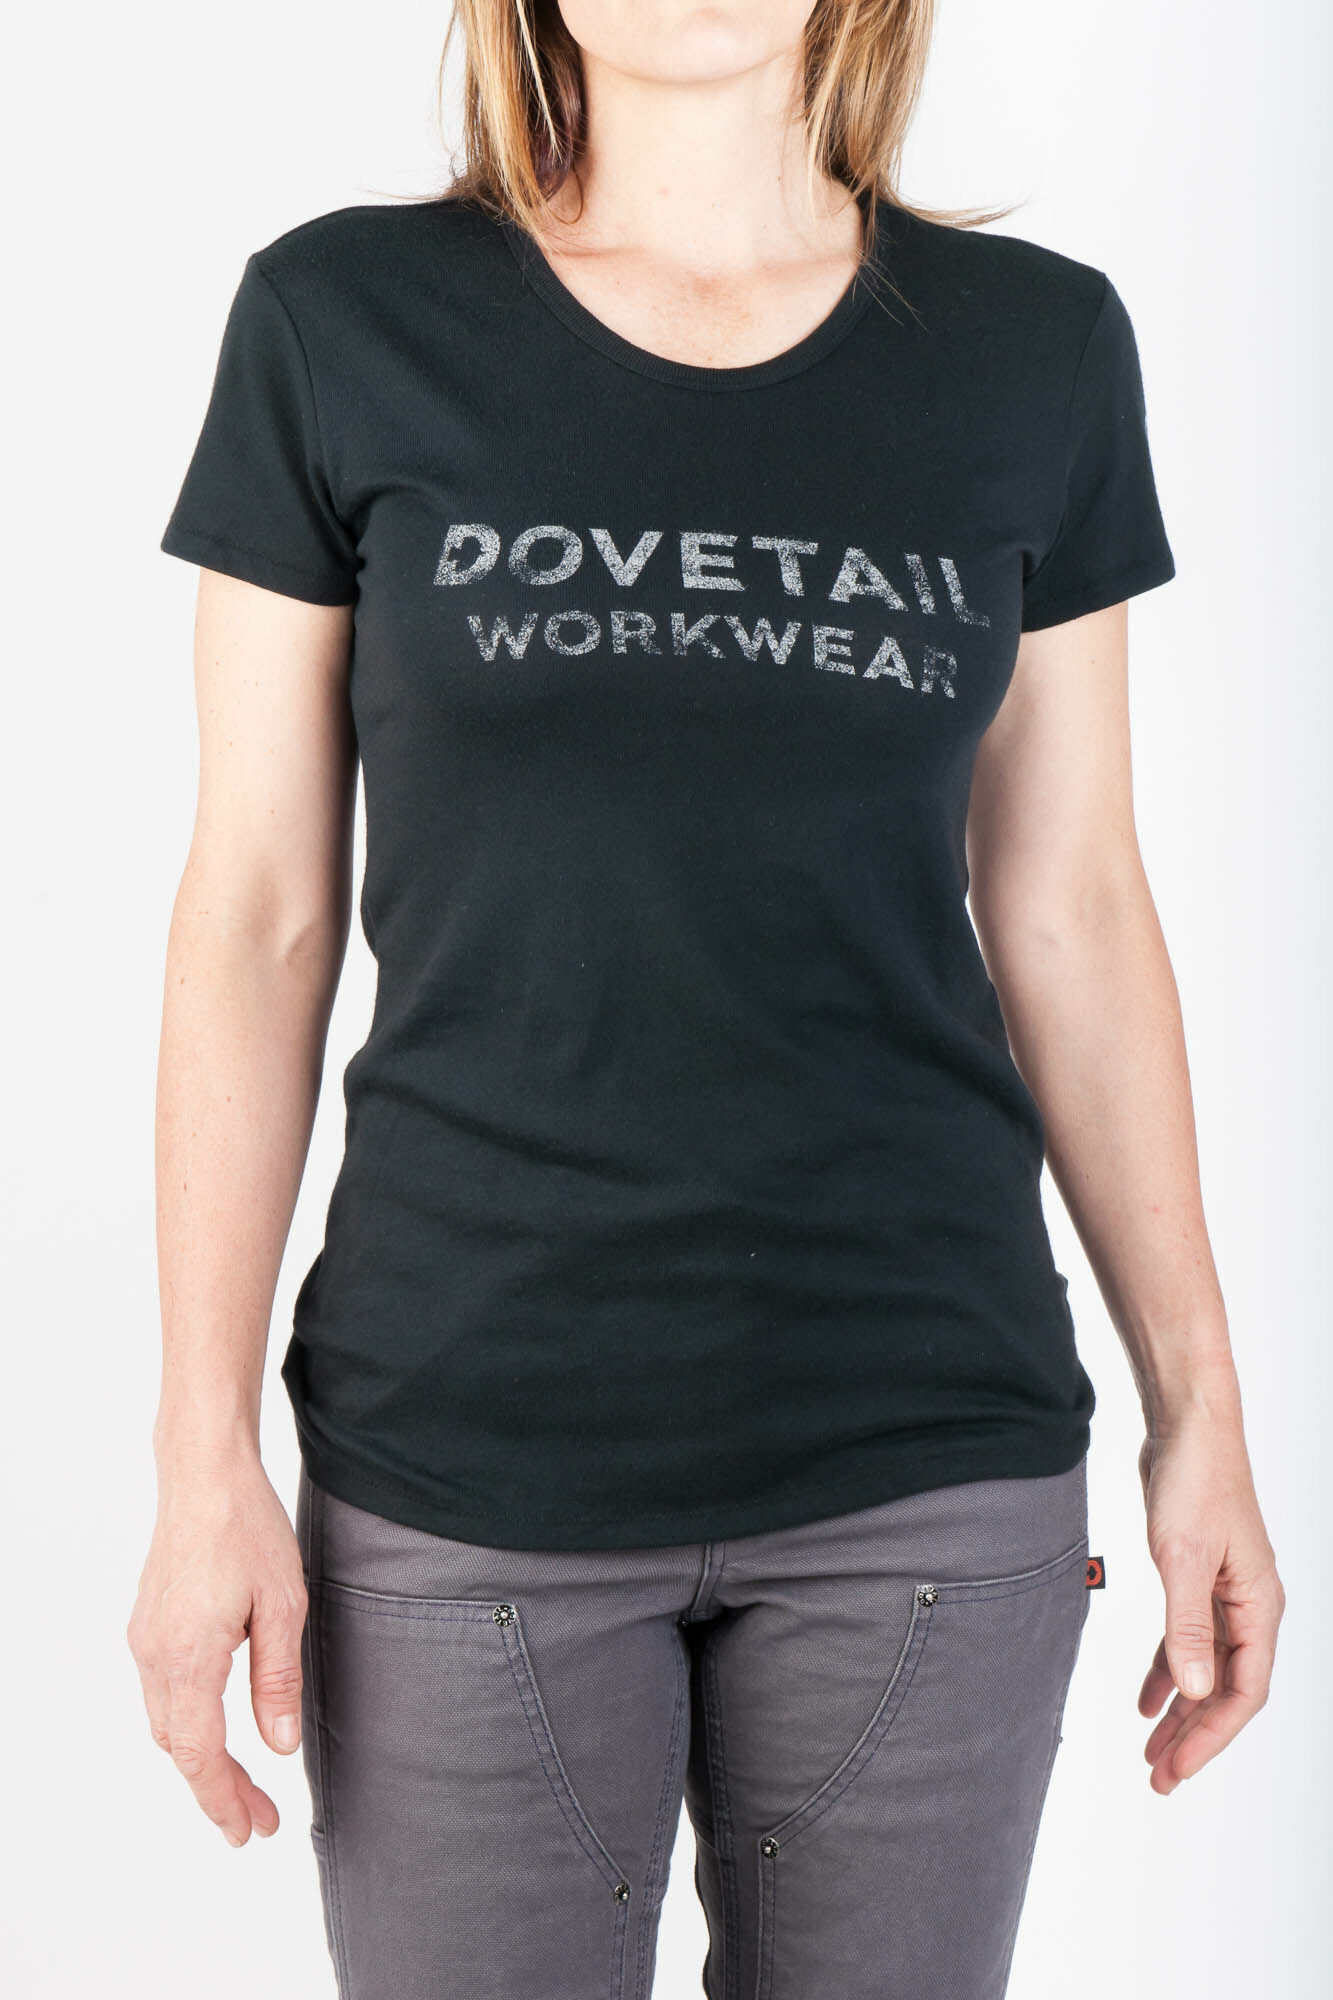 DTW-Dovetail-Tee-1-2000px.jpg